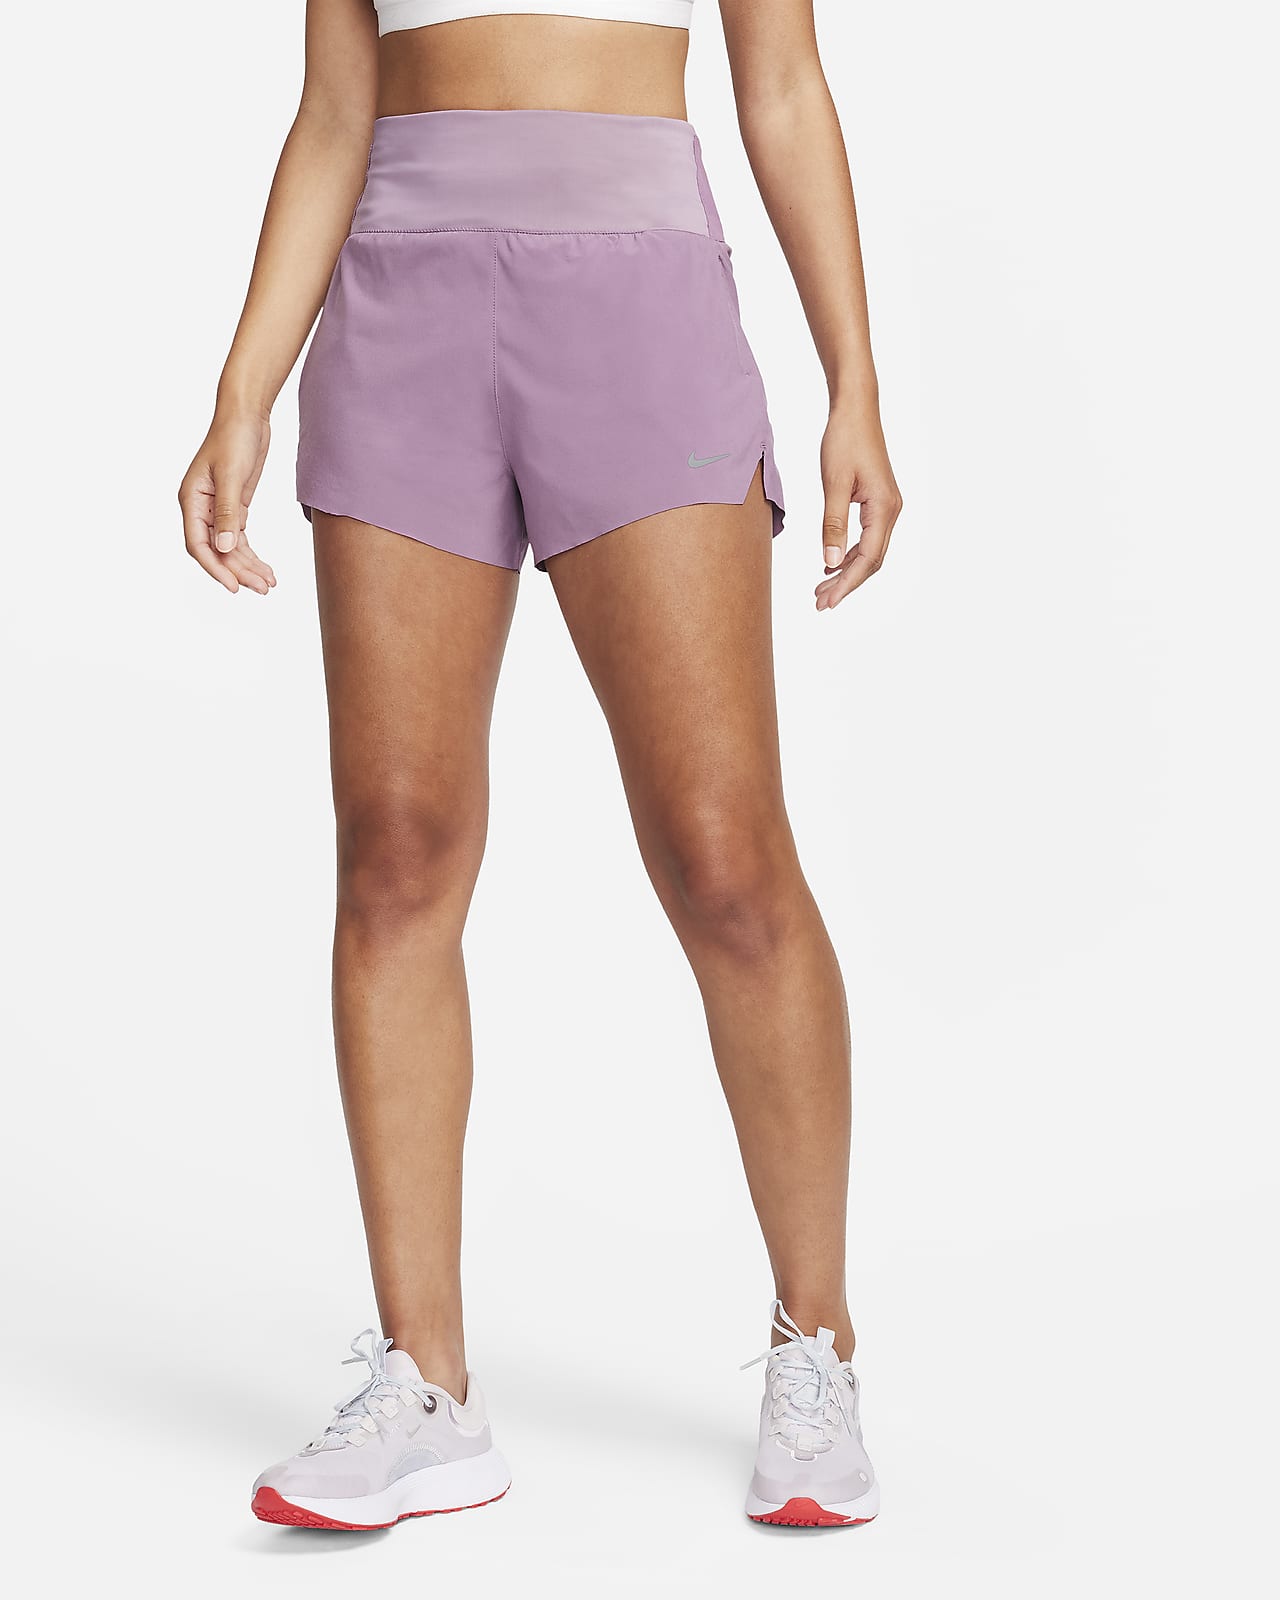 Nike Dri-FIT Swift Women's High-Waisted 3 Brief-Lined Running Shorts.